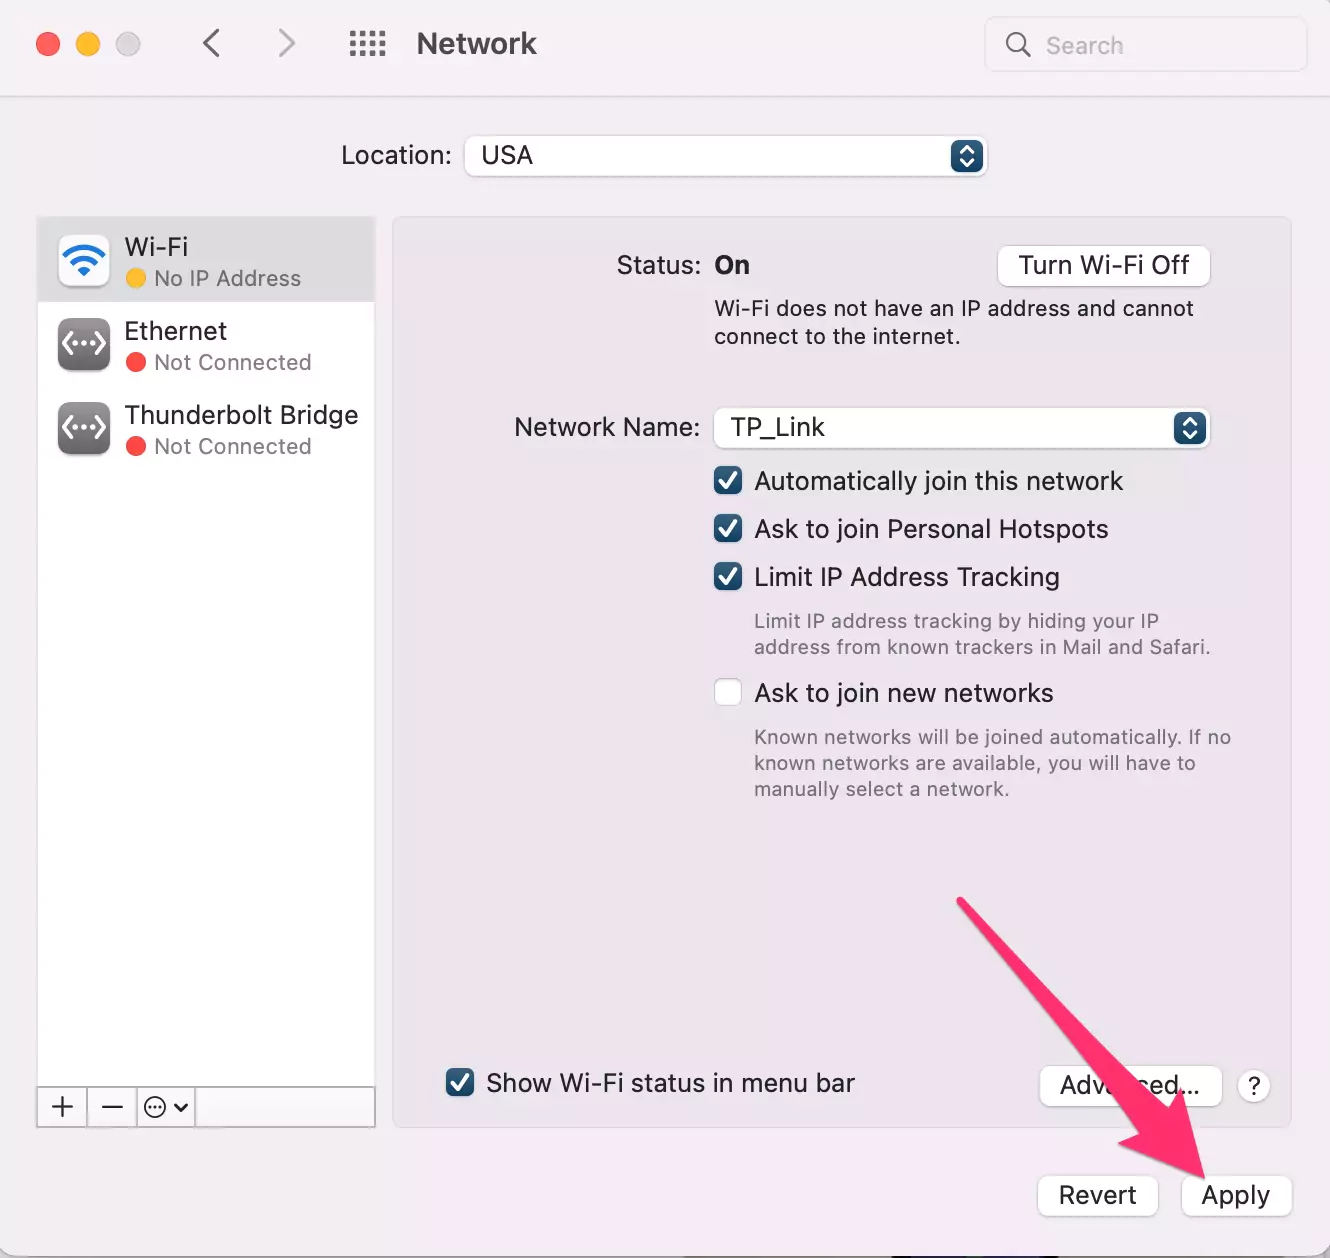 click-on-apply-to-made-final-changes-on-your-mac-network-setting